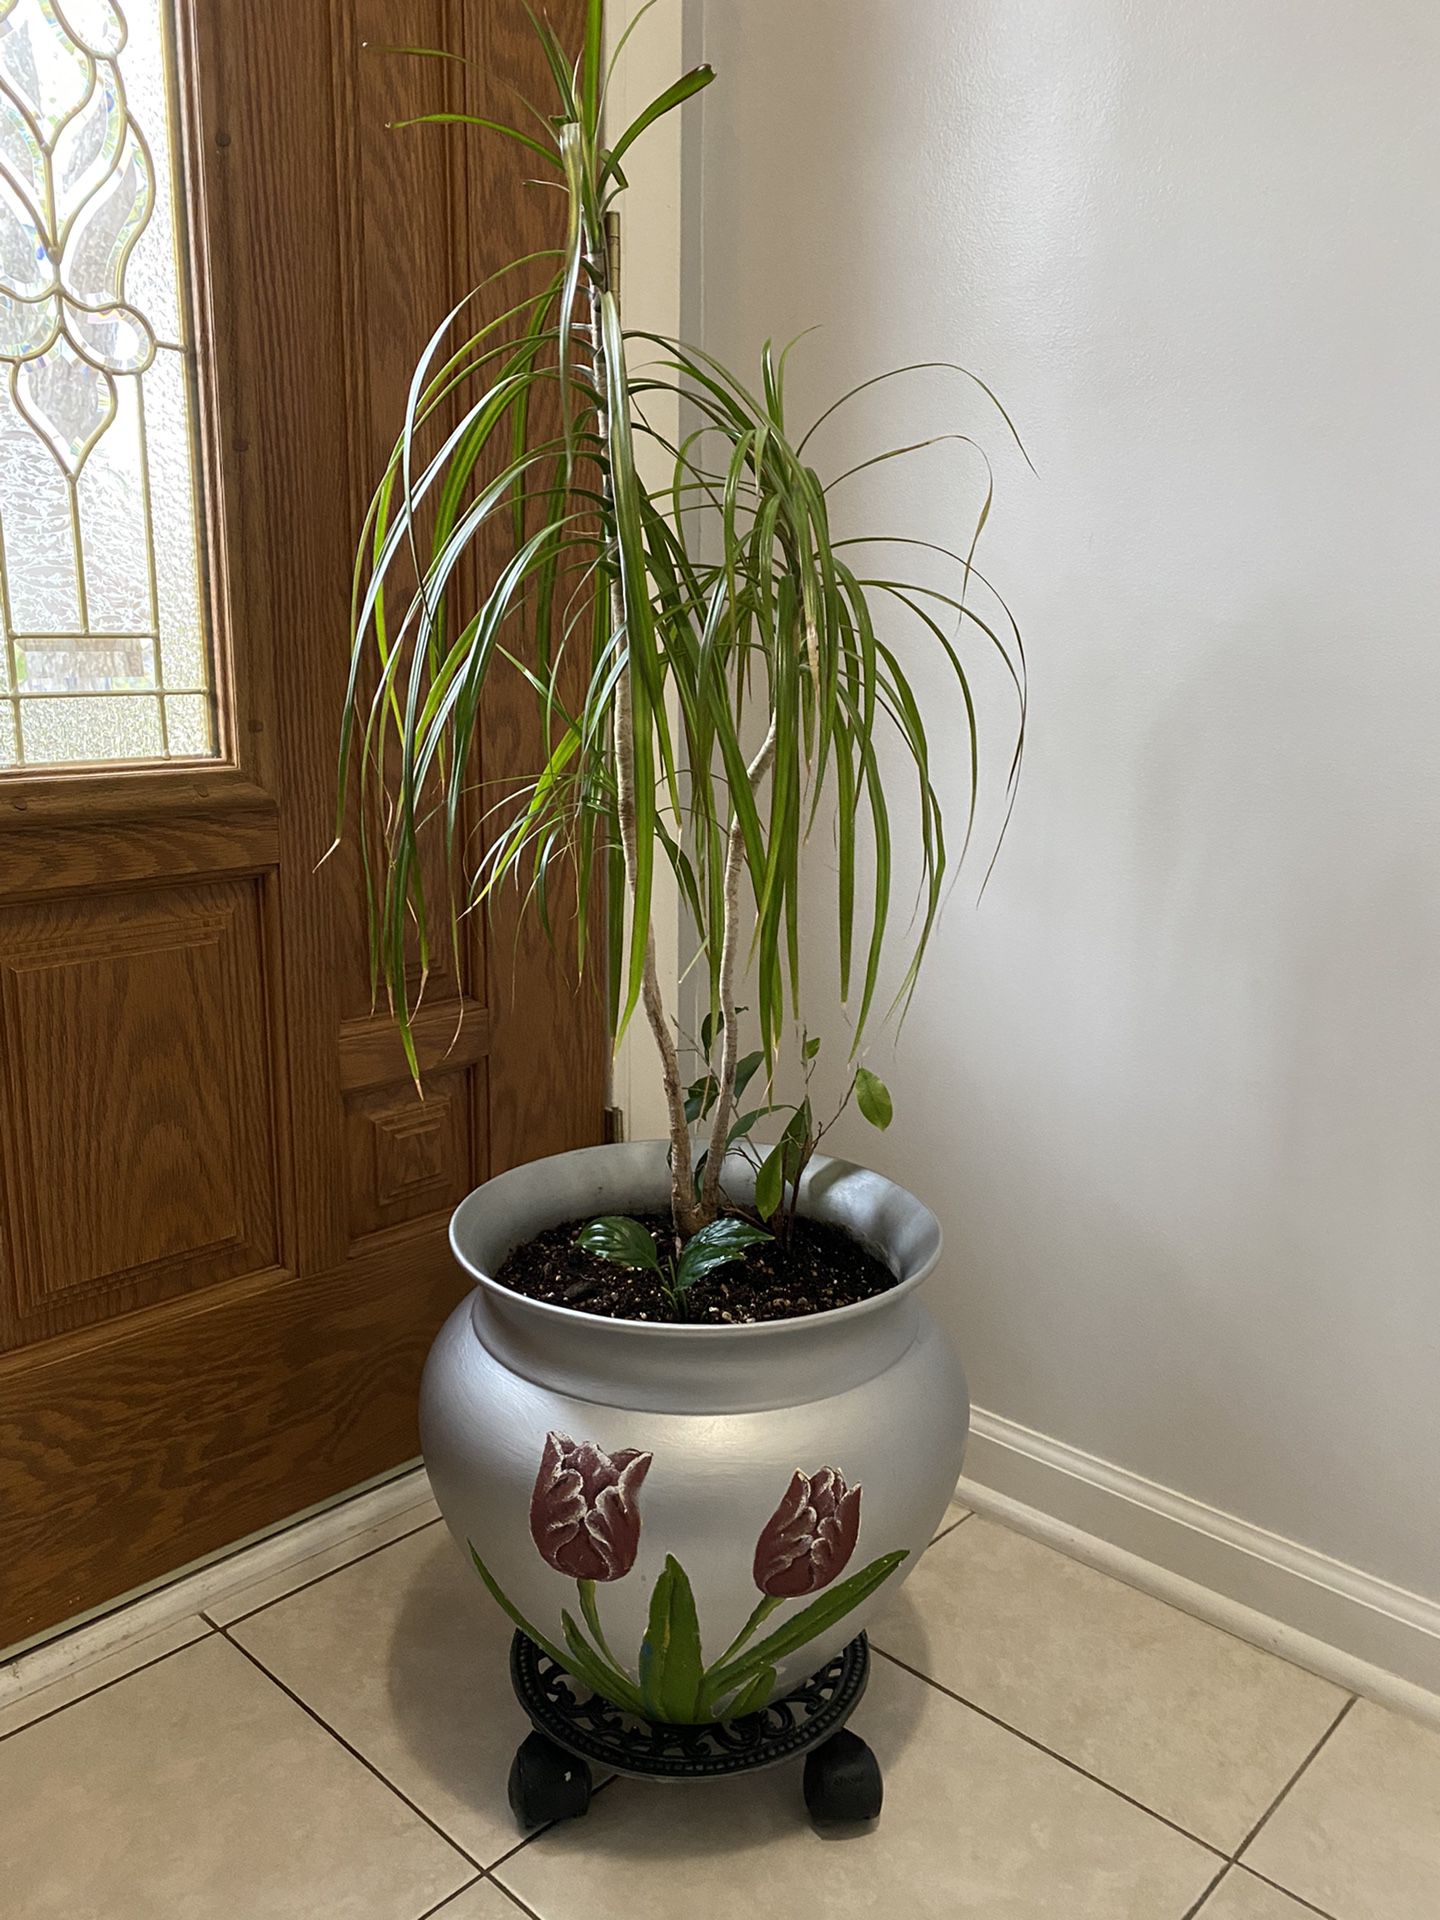 Plant Very Beautiful And Healthy In a Ceramic Pot. Stand Included 